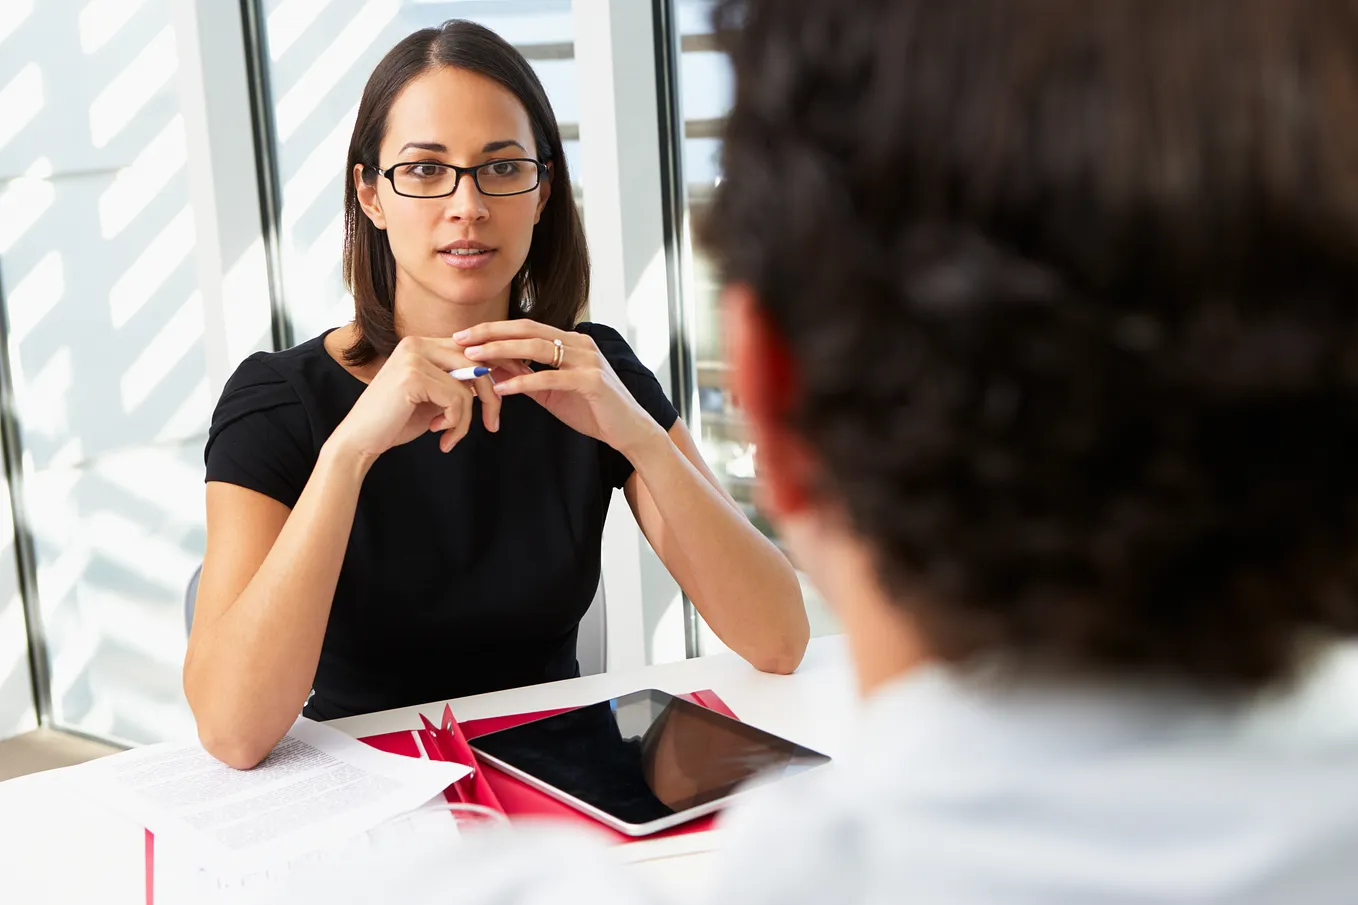 The Art of Interviewing and Candidate Assessment